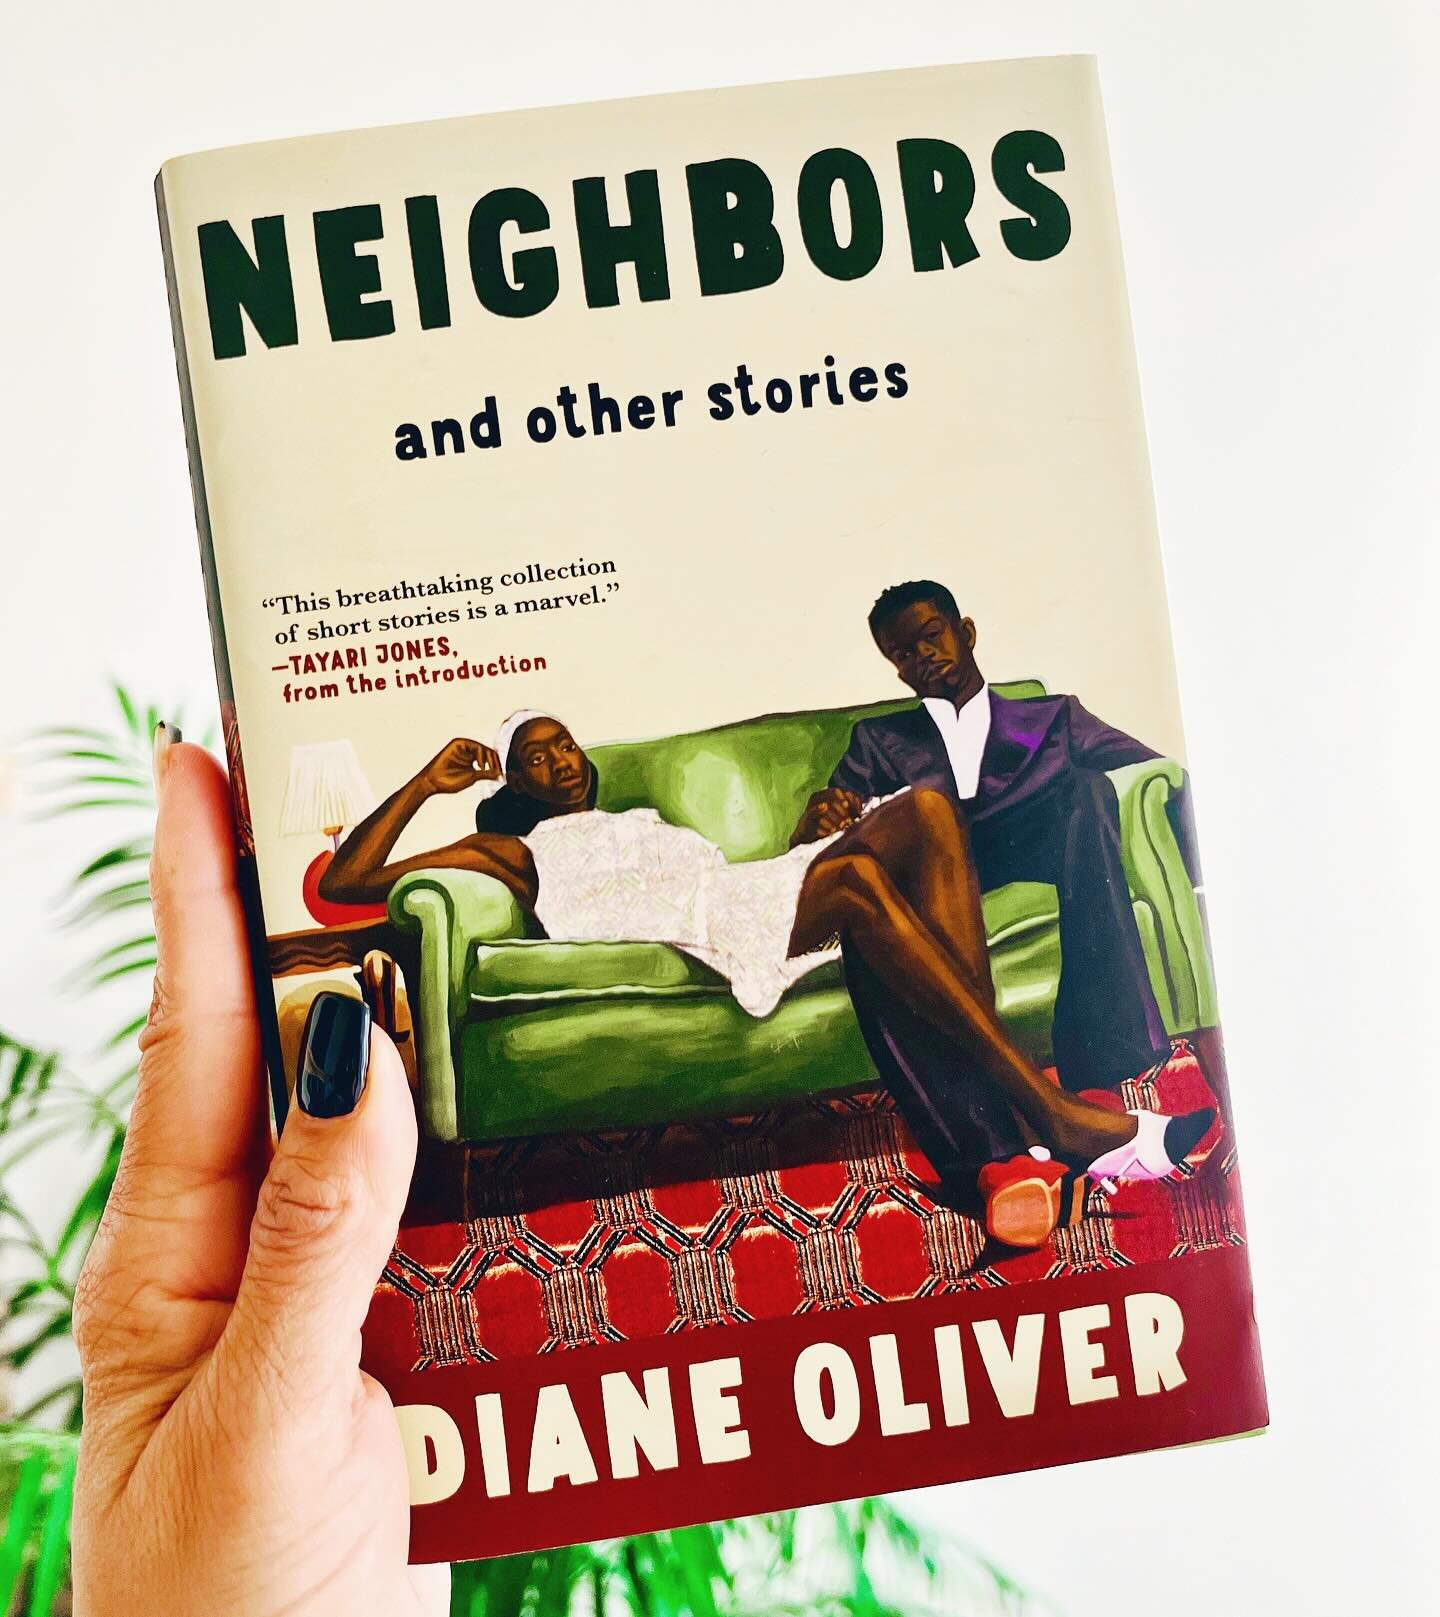 ✨ GIVEAWAY!! ✨ I&rsquo;m closing out the last weekend of Women&rsquo;s History Month with a giveaway! Thanks the wonderful folks at @groveatlantic, FIVE (5) lucky readers will receive a copy of NEIGHBORS and Other Stories by Diane Oliver. I can&rsquo